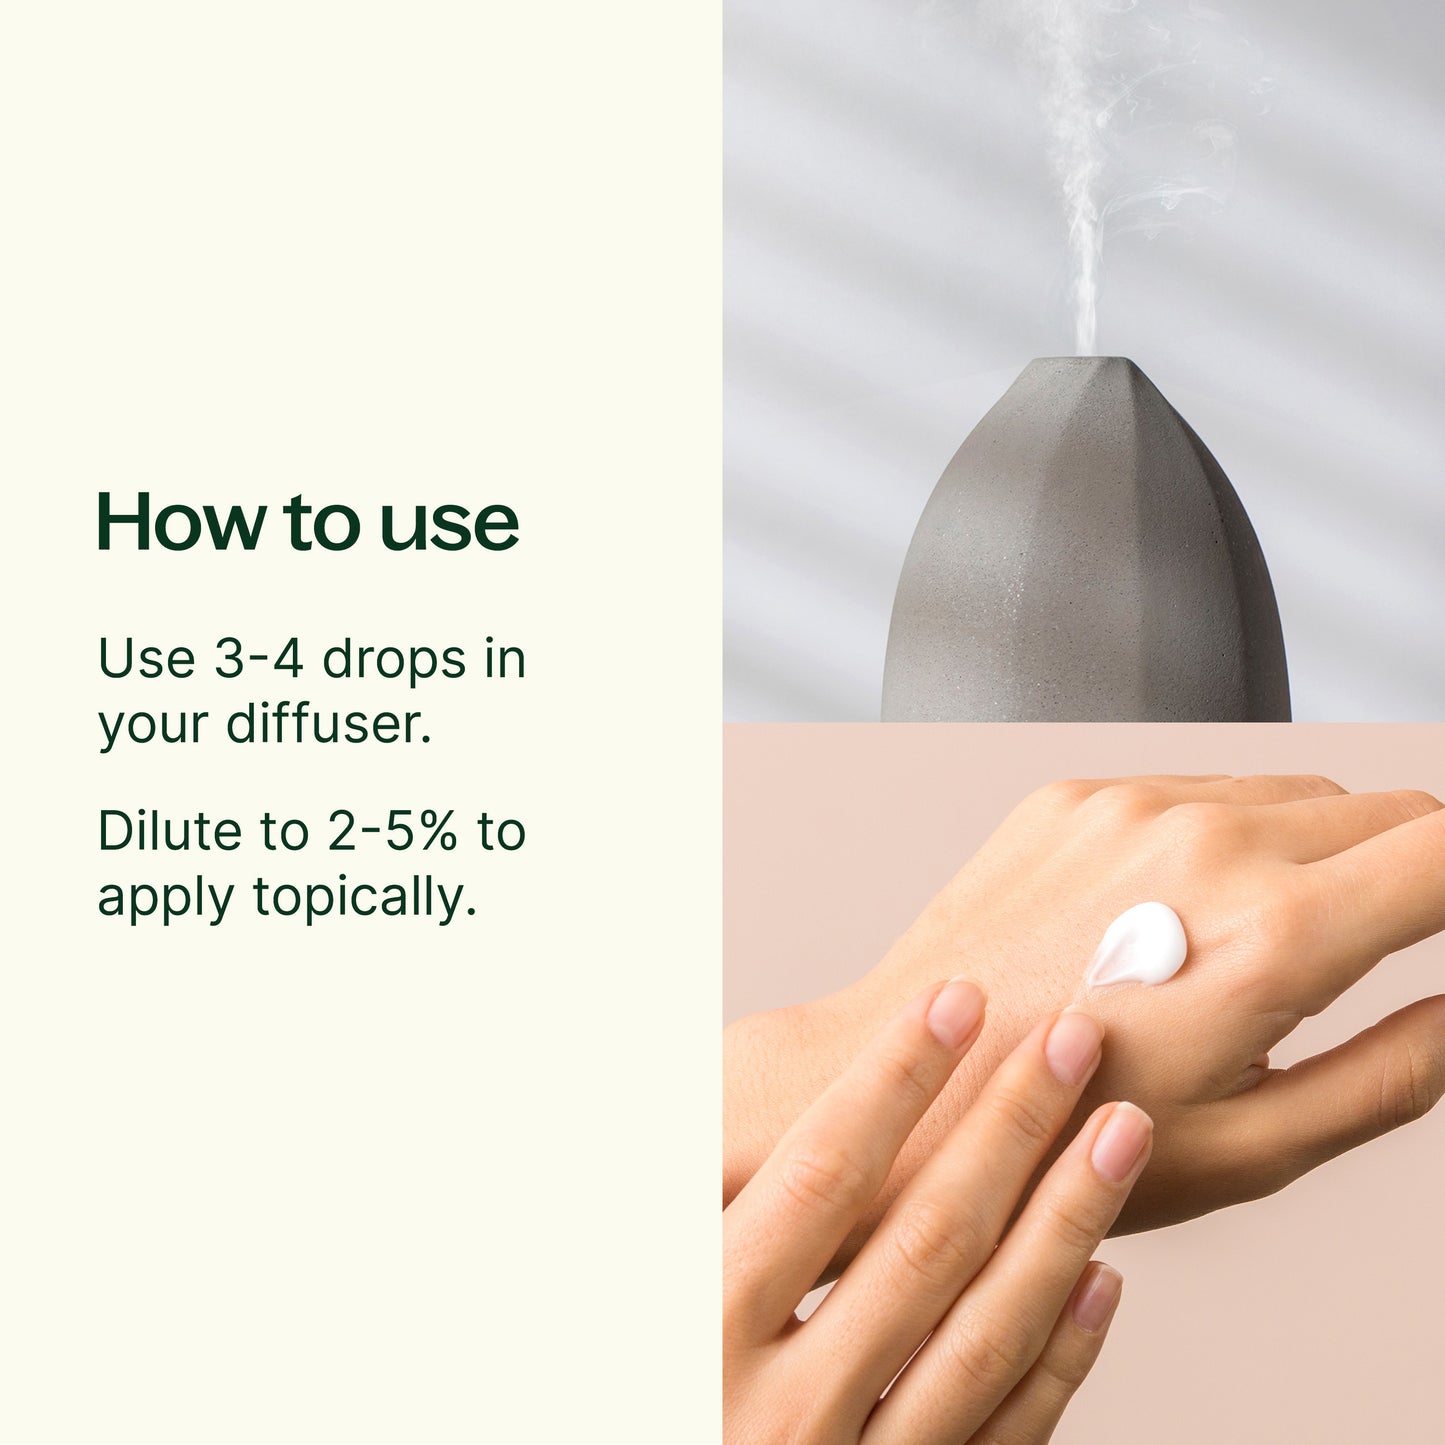 How to use Organic Copaiba Oleoresin Essential Oil: Use 3-4 drops in your diffuser. Dilute 2-5% to apply topically.